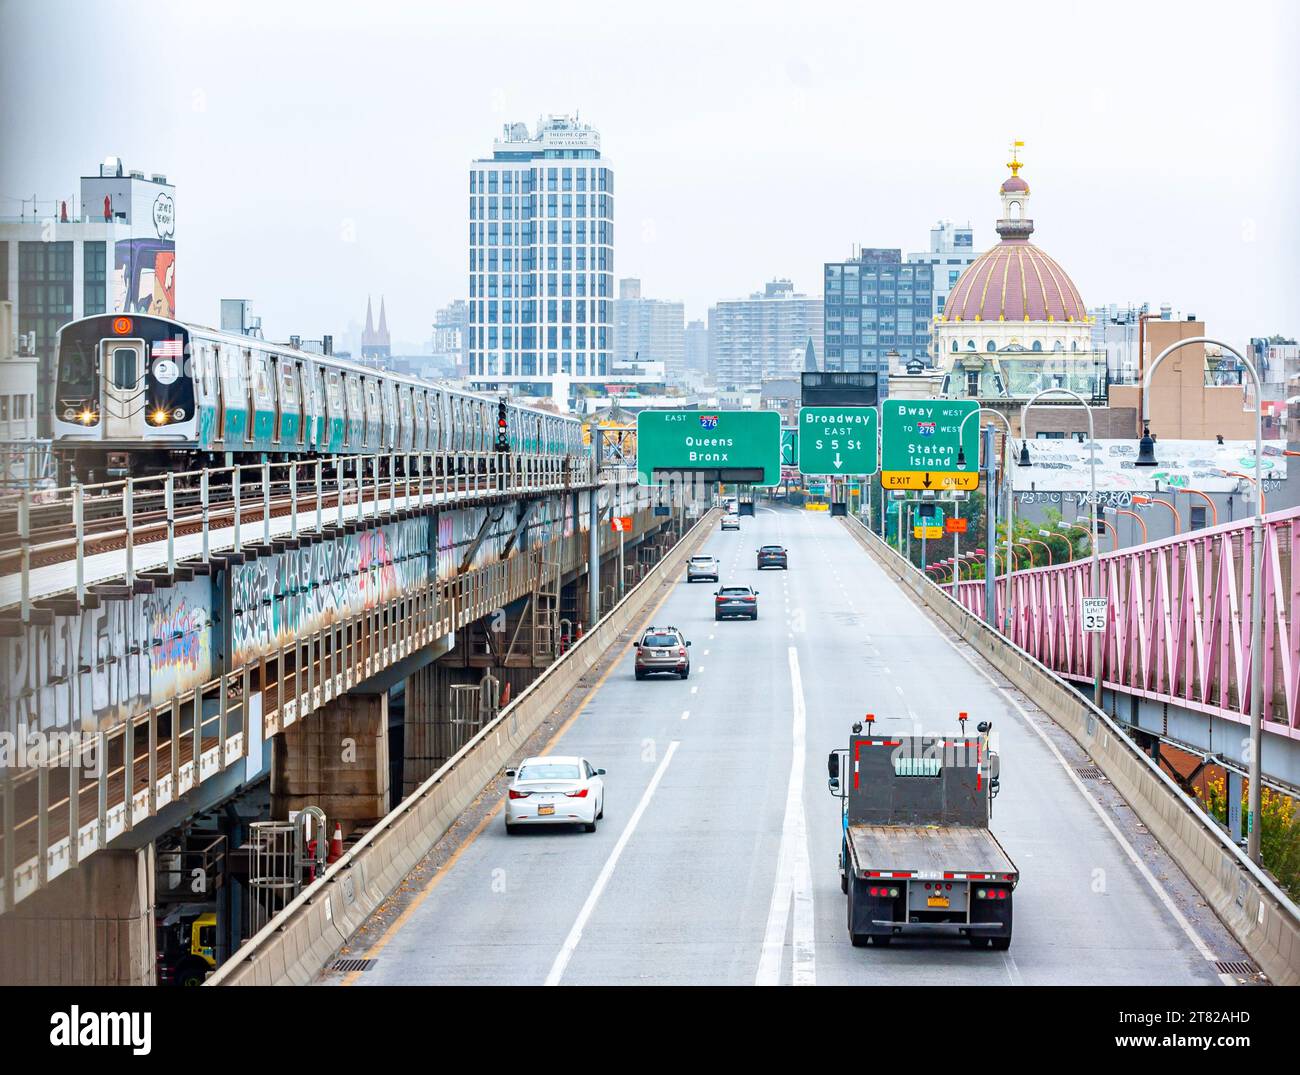 A subway train and traffic on the Williamsburg Bridge between Manhattan and Brooklyn, New York City, taxi heading to Queens and the Bronx Stock Photo